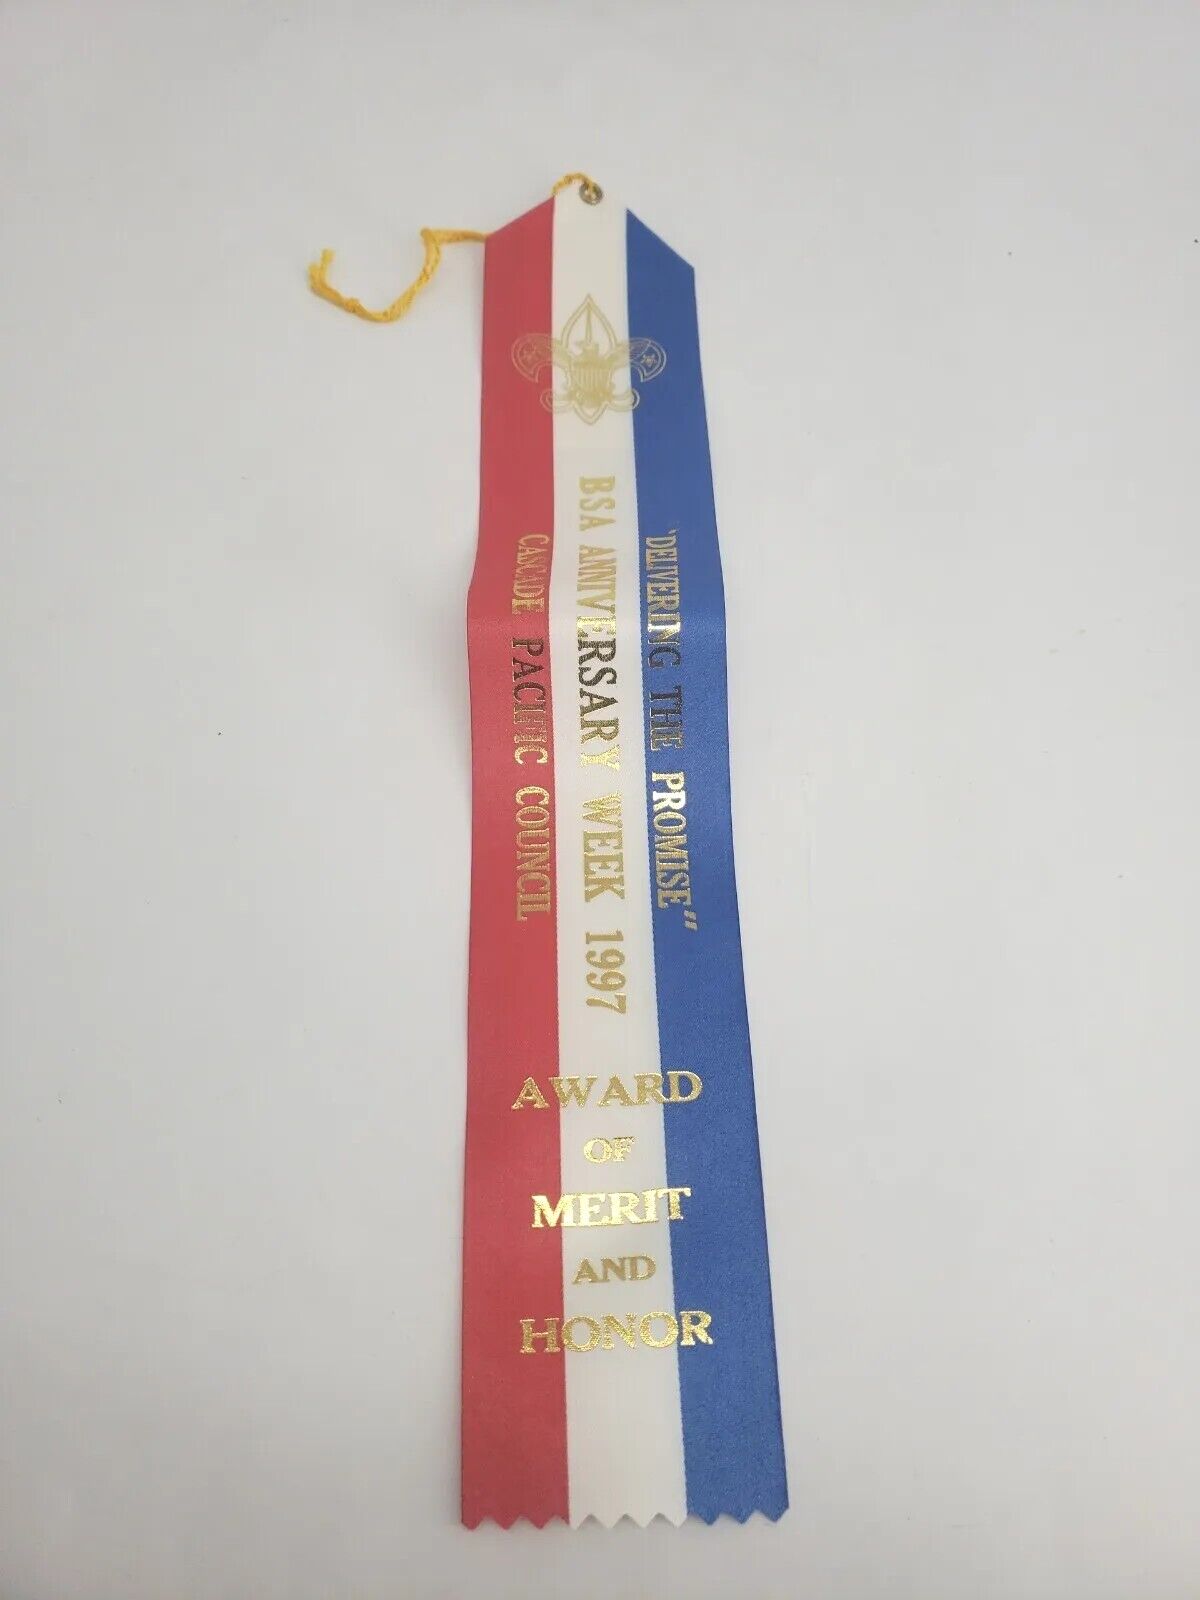 Vintage 1997 Boy Scout USA Ann. Week Award Of Merit And Honor Satin Ribbons New